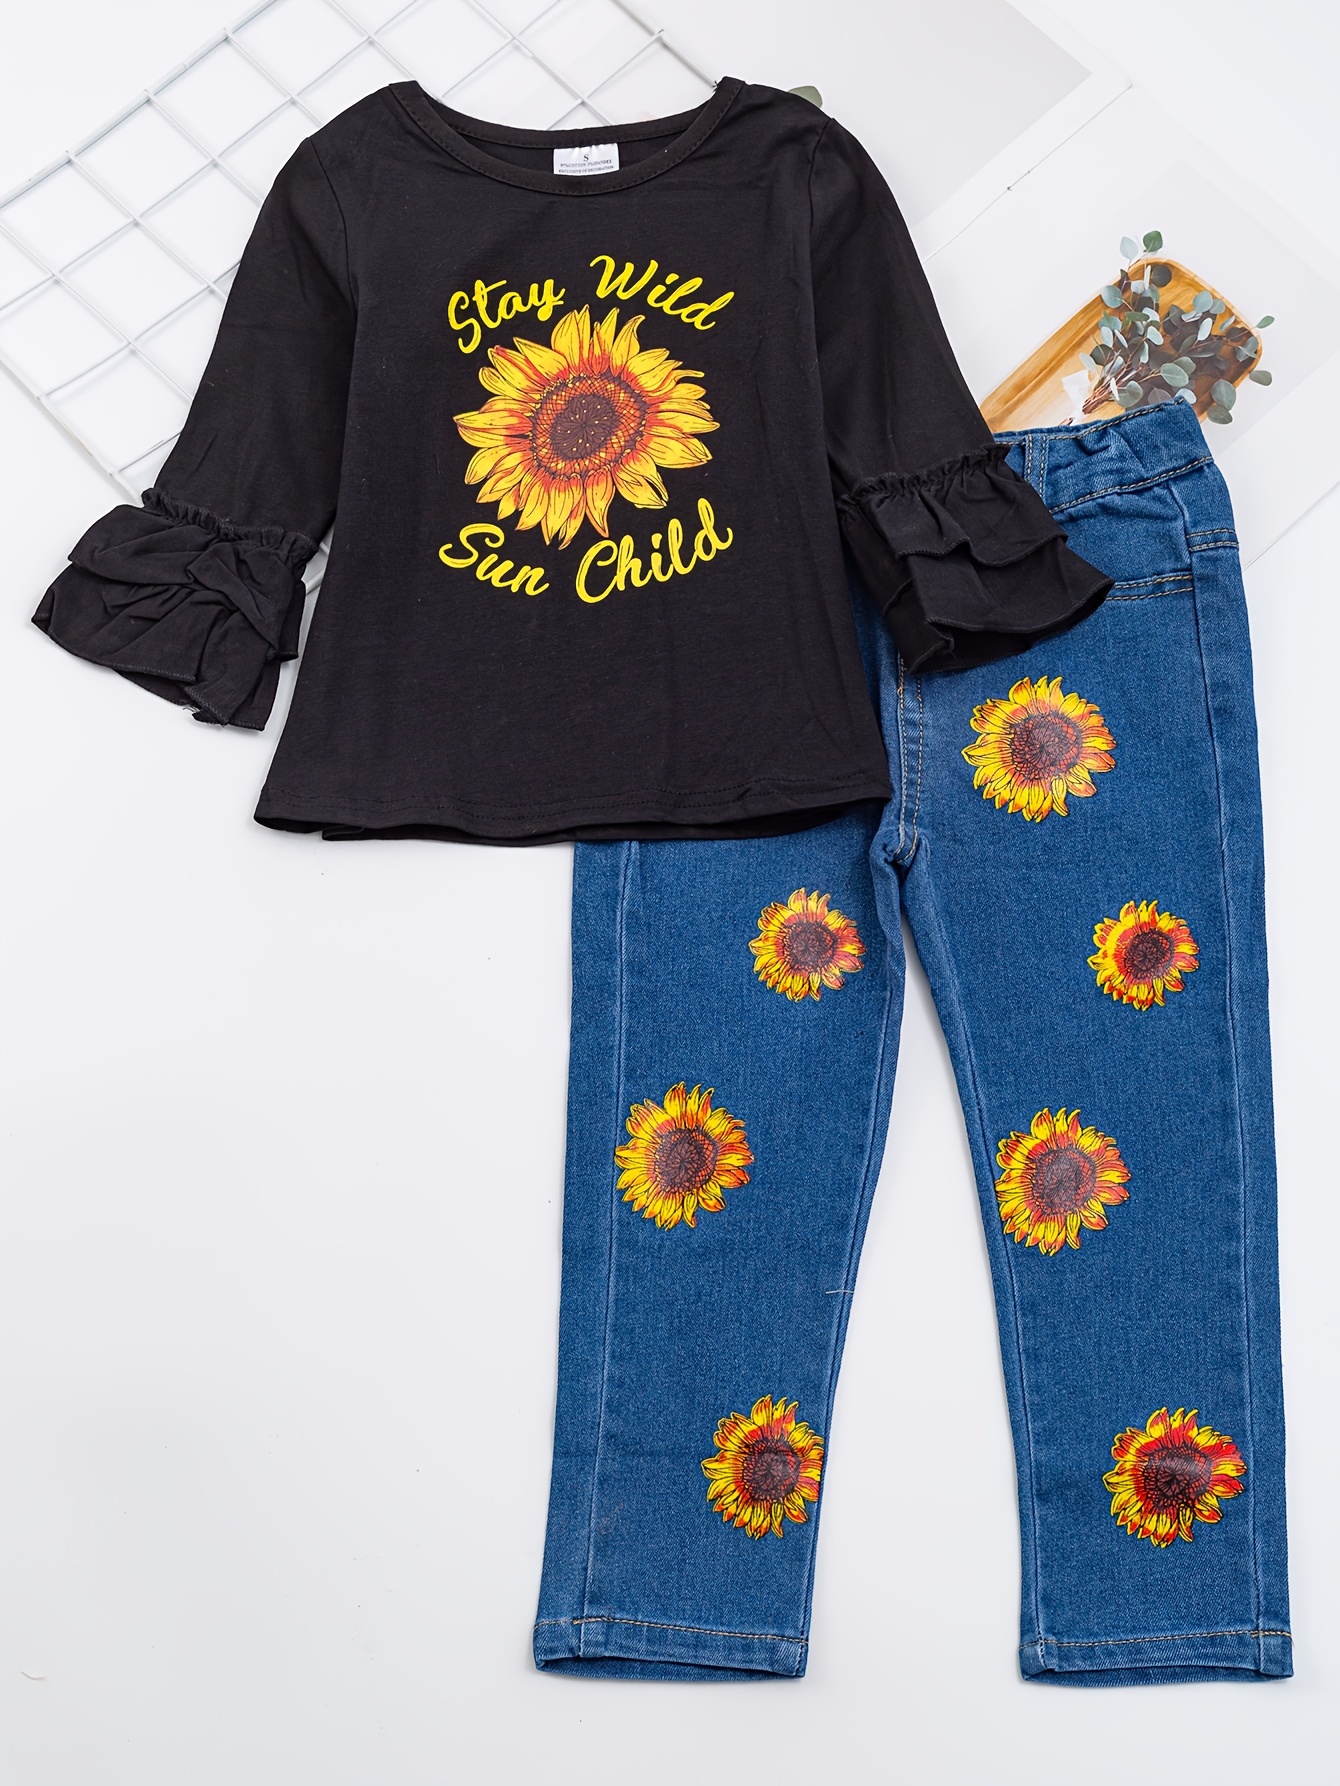 Wild About Christmas Women's Tee and Leggings Pajama Separates